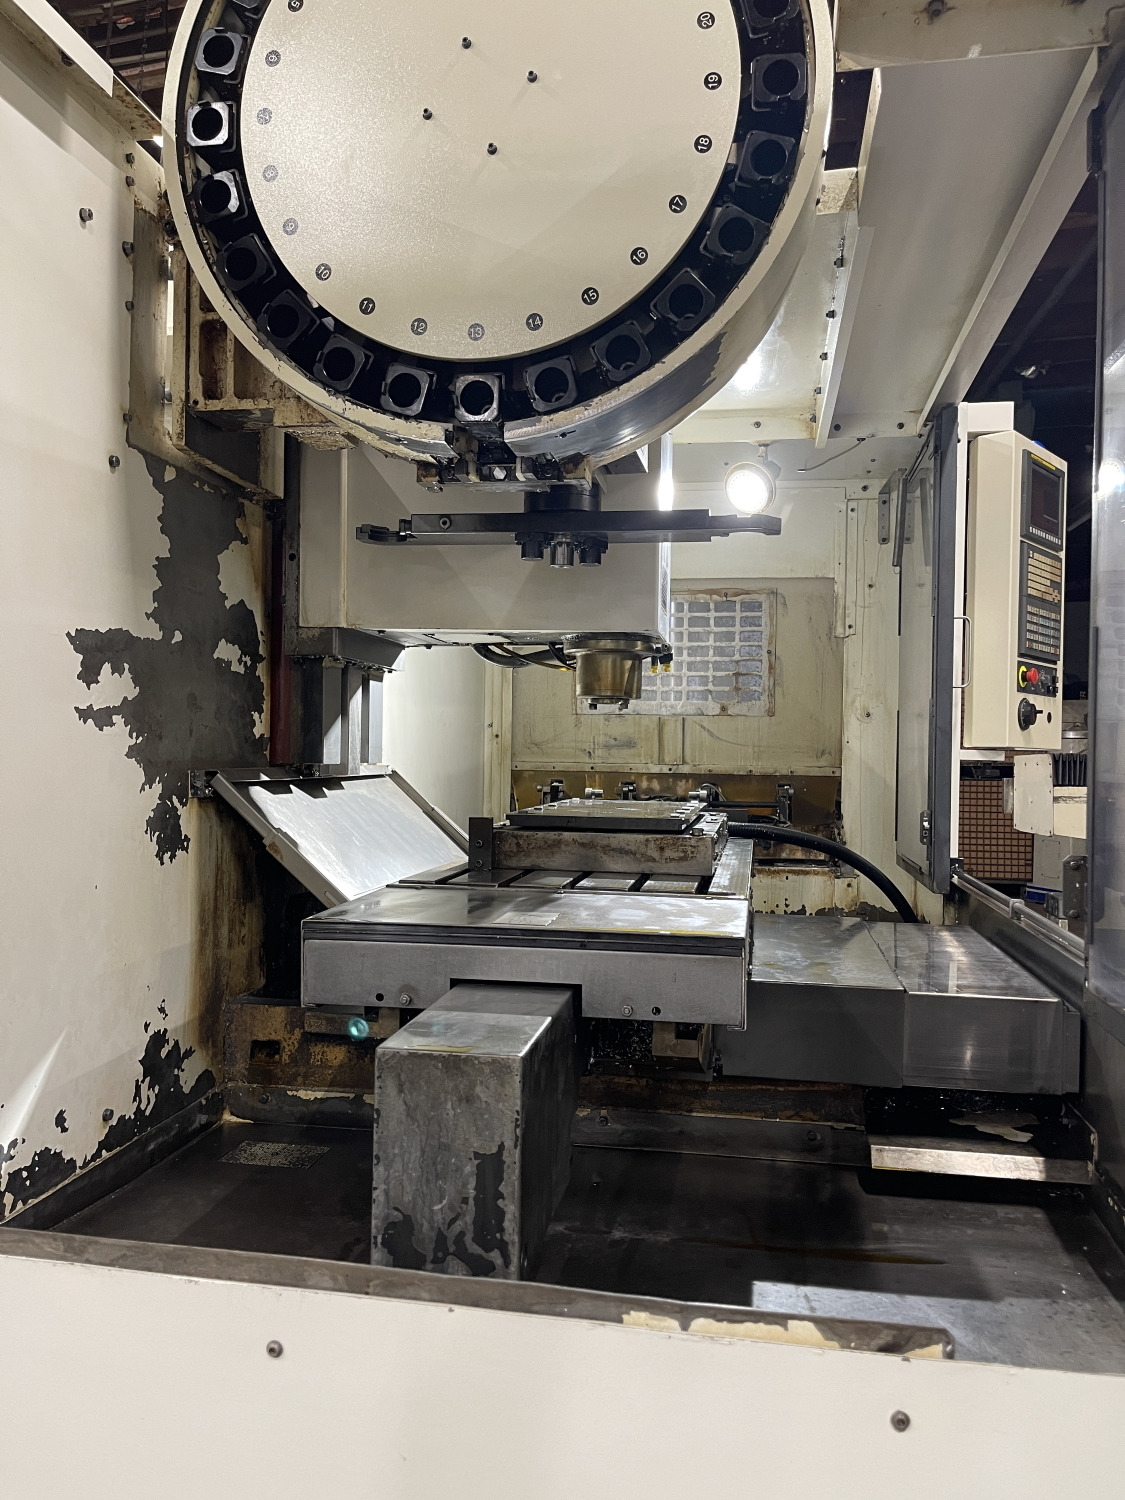 2007 MAG FADAL VMC-4020FX 5-Axis or More CNC Lathes | RELCO MACHINERY